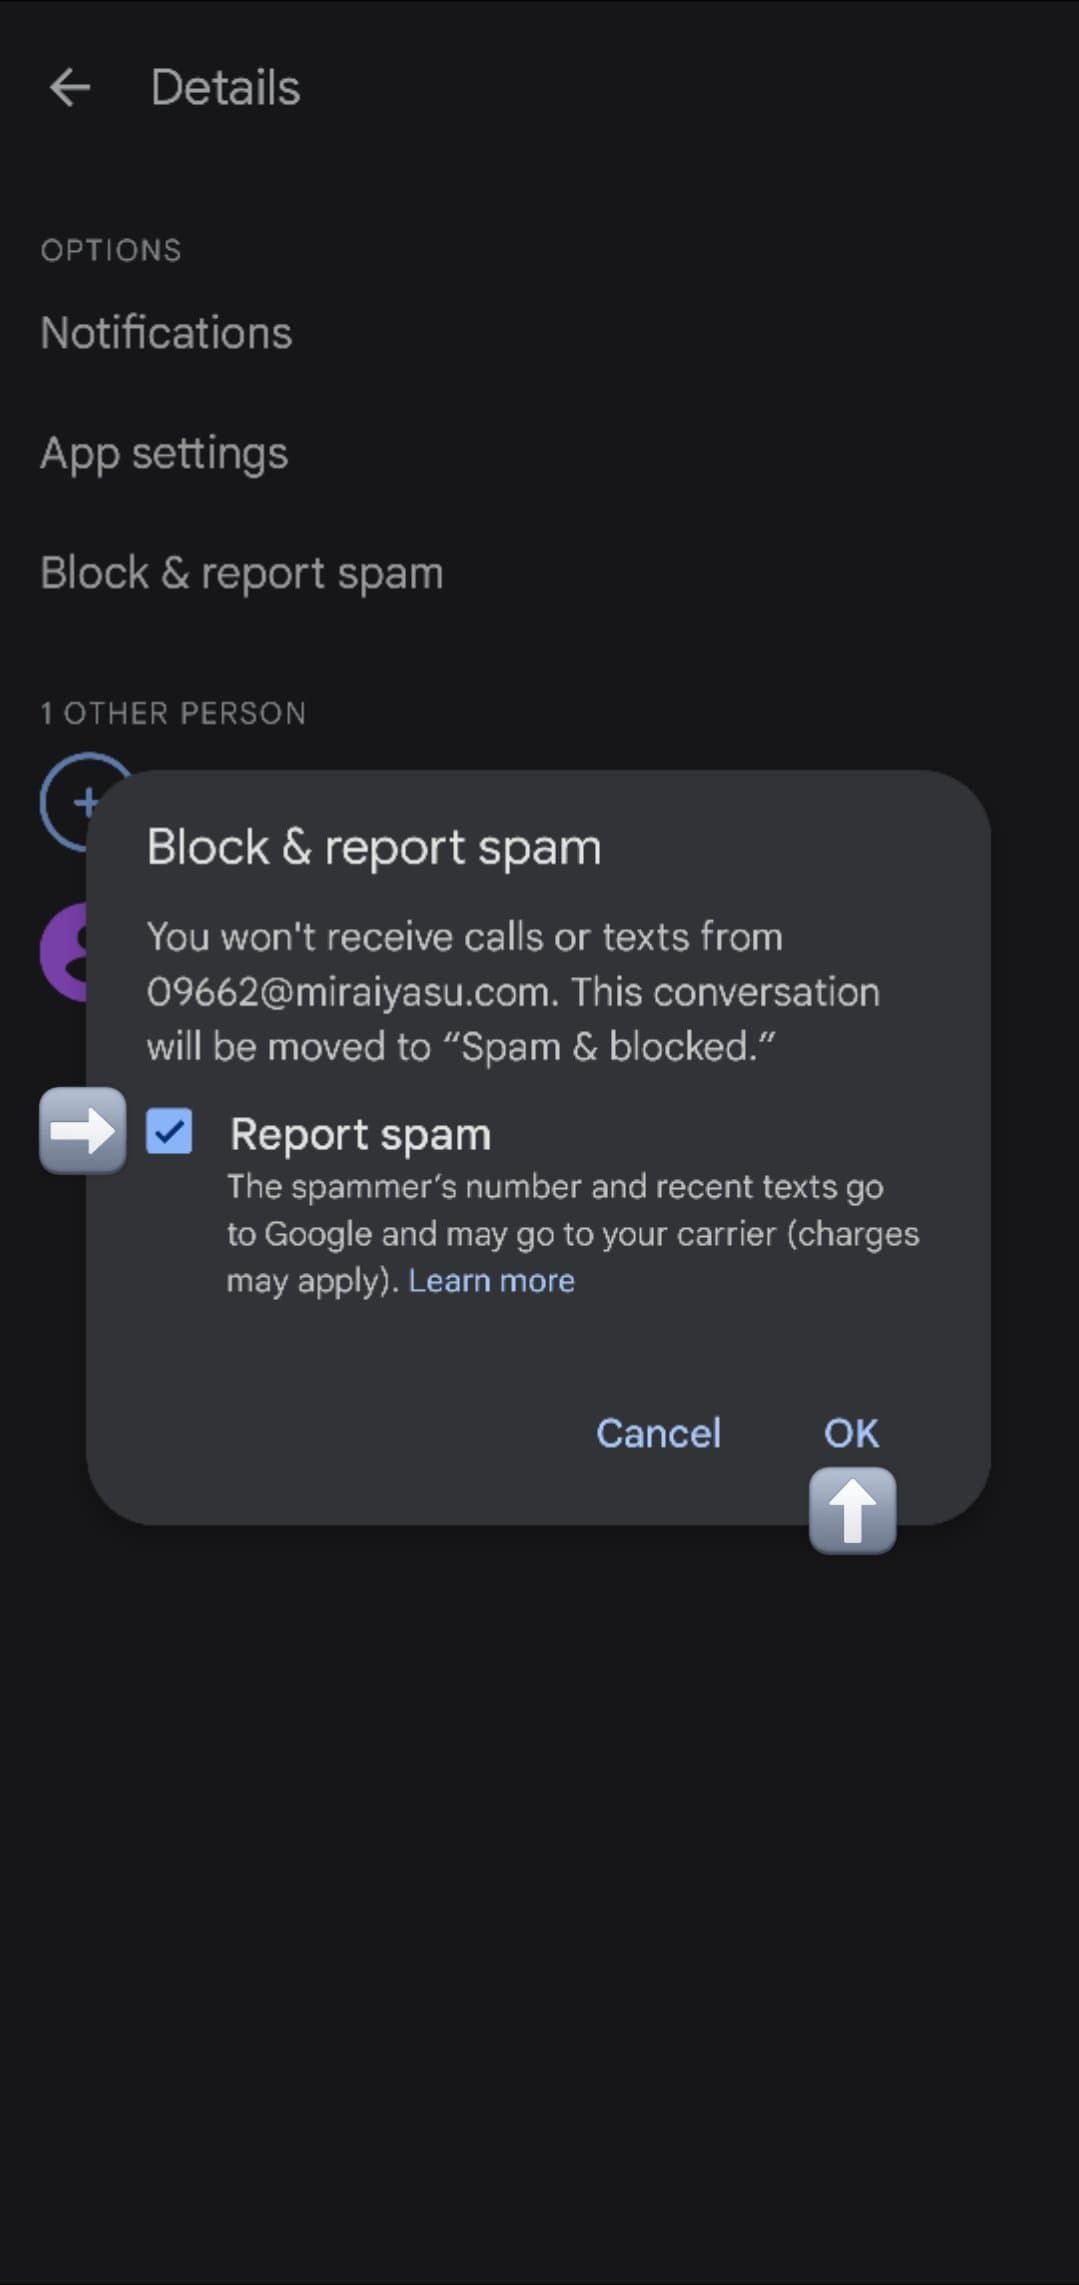 Image shows the Block & report spam pop up with arrows pointing to the 'Report spam' toggle and 'OK'.